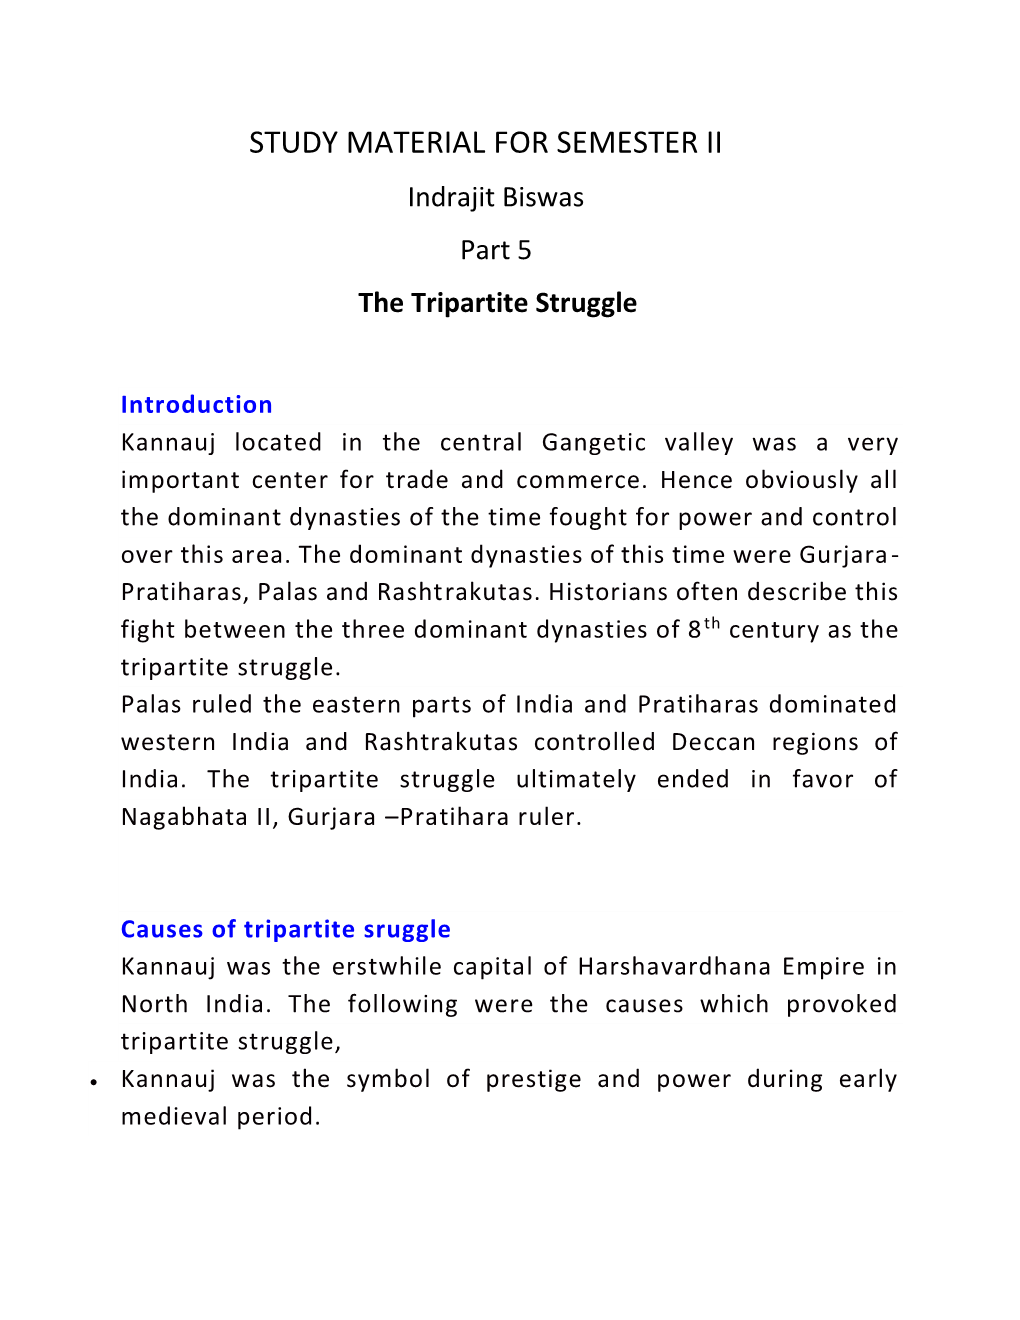 STUDY MATERIAL for SEMESTER II Indrajit Biswas Part 5 the Tripartite Struggle